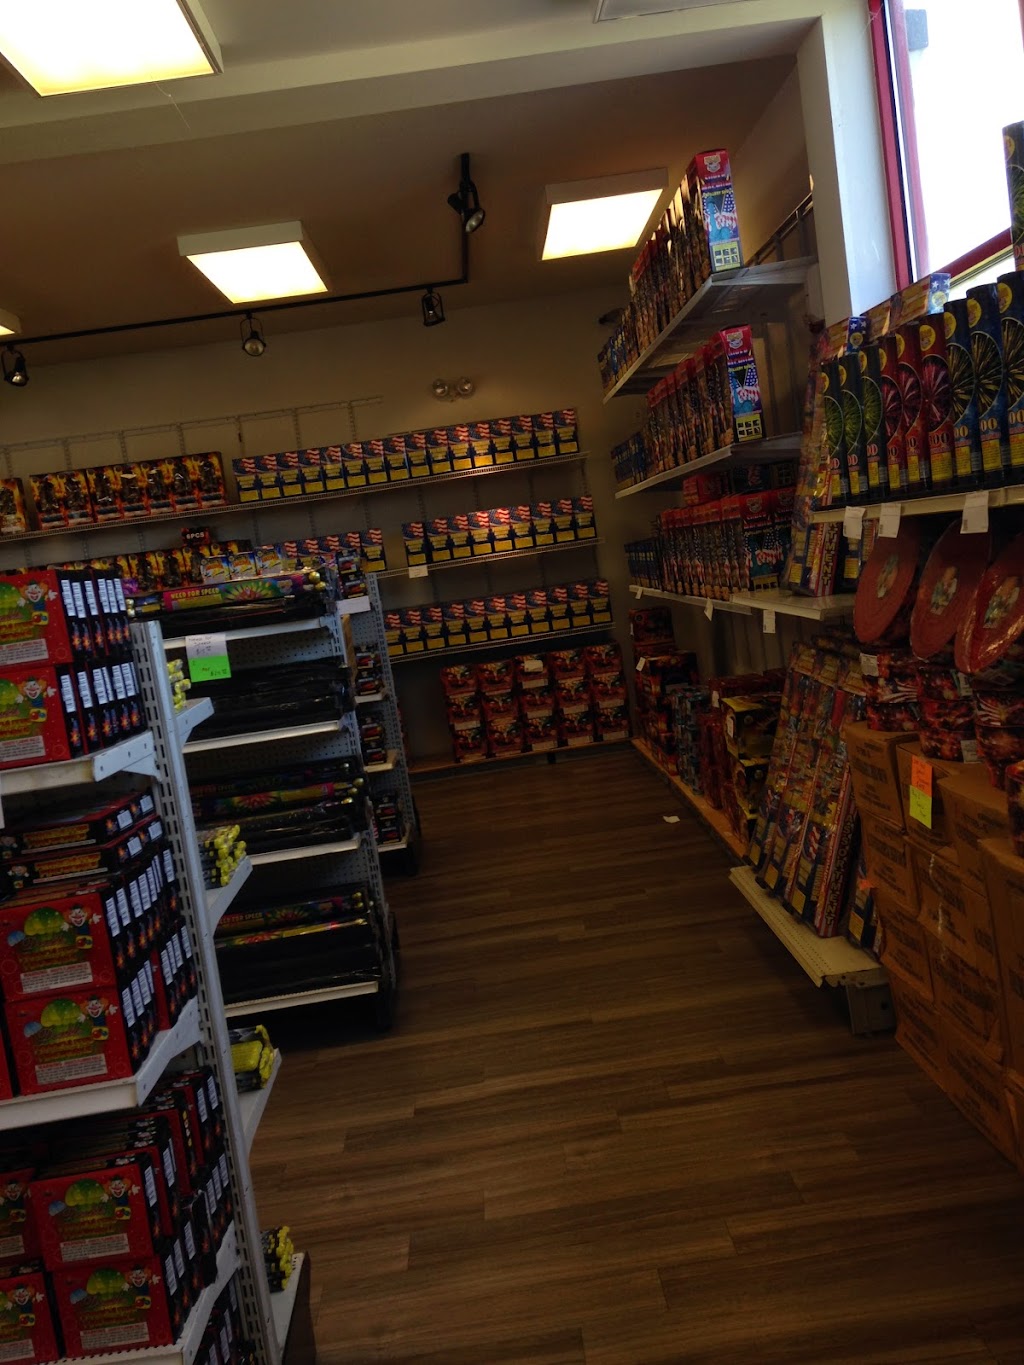 Fireworks Outlet | 2889 PA-611, Tannersville, PA 18372 | Phone: (570) 629-6000